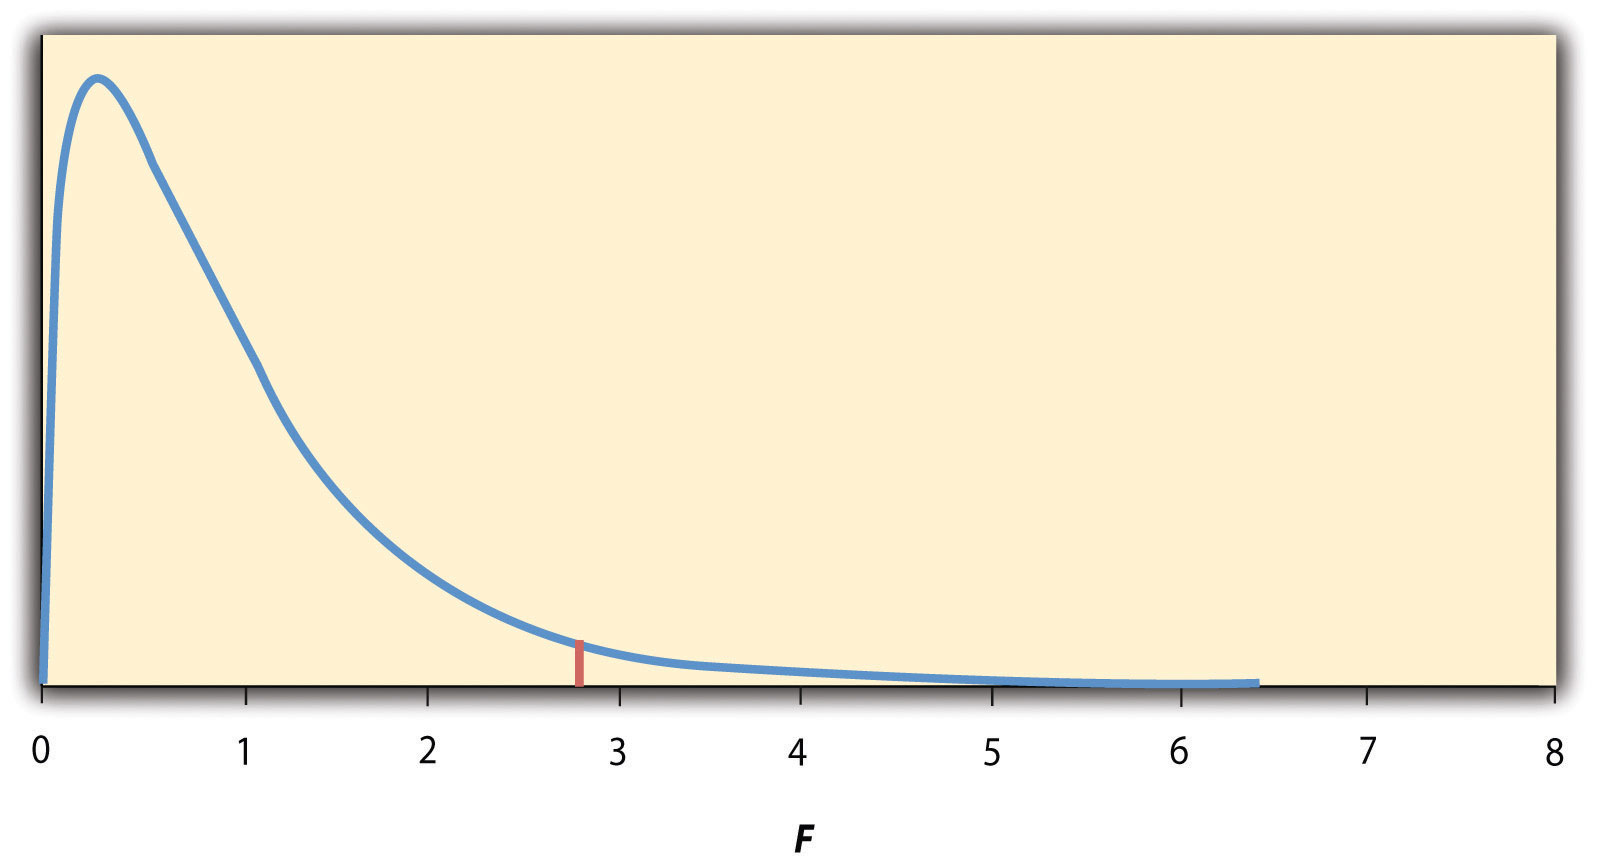 Distribution of the F Ratio With 2 and 37 Degrees of Freedom When the Null Hypothesis Is True. The red vertical line represents the critical value when α is .05